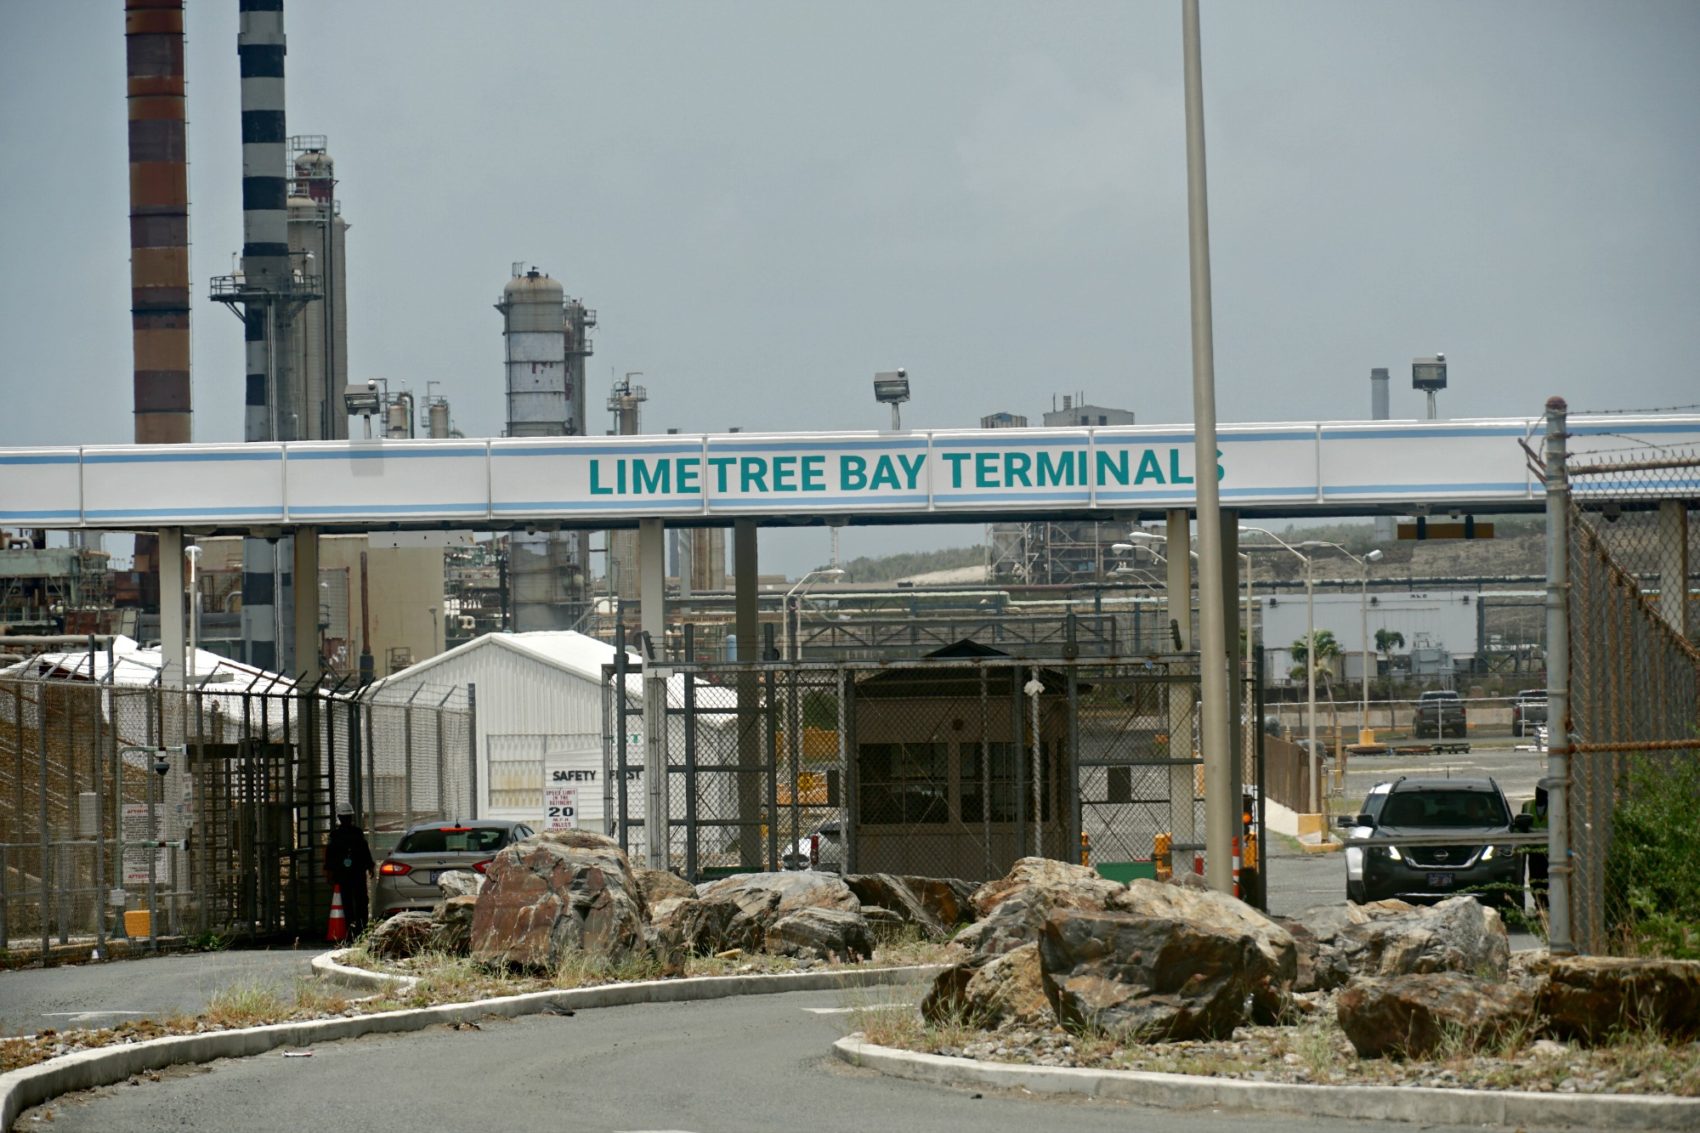 Limetree Bay Refinery Tells U.S. Virgin Islands Youths It Is Willing To Pay For Academic Scholarships